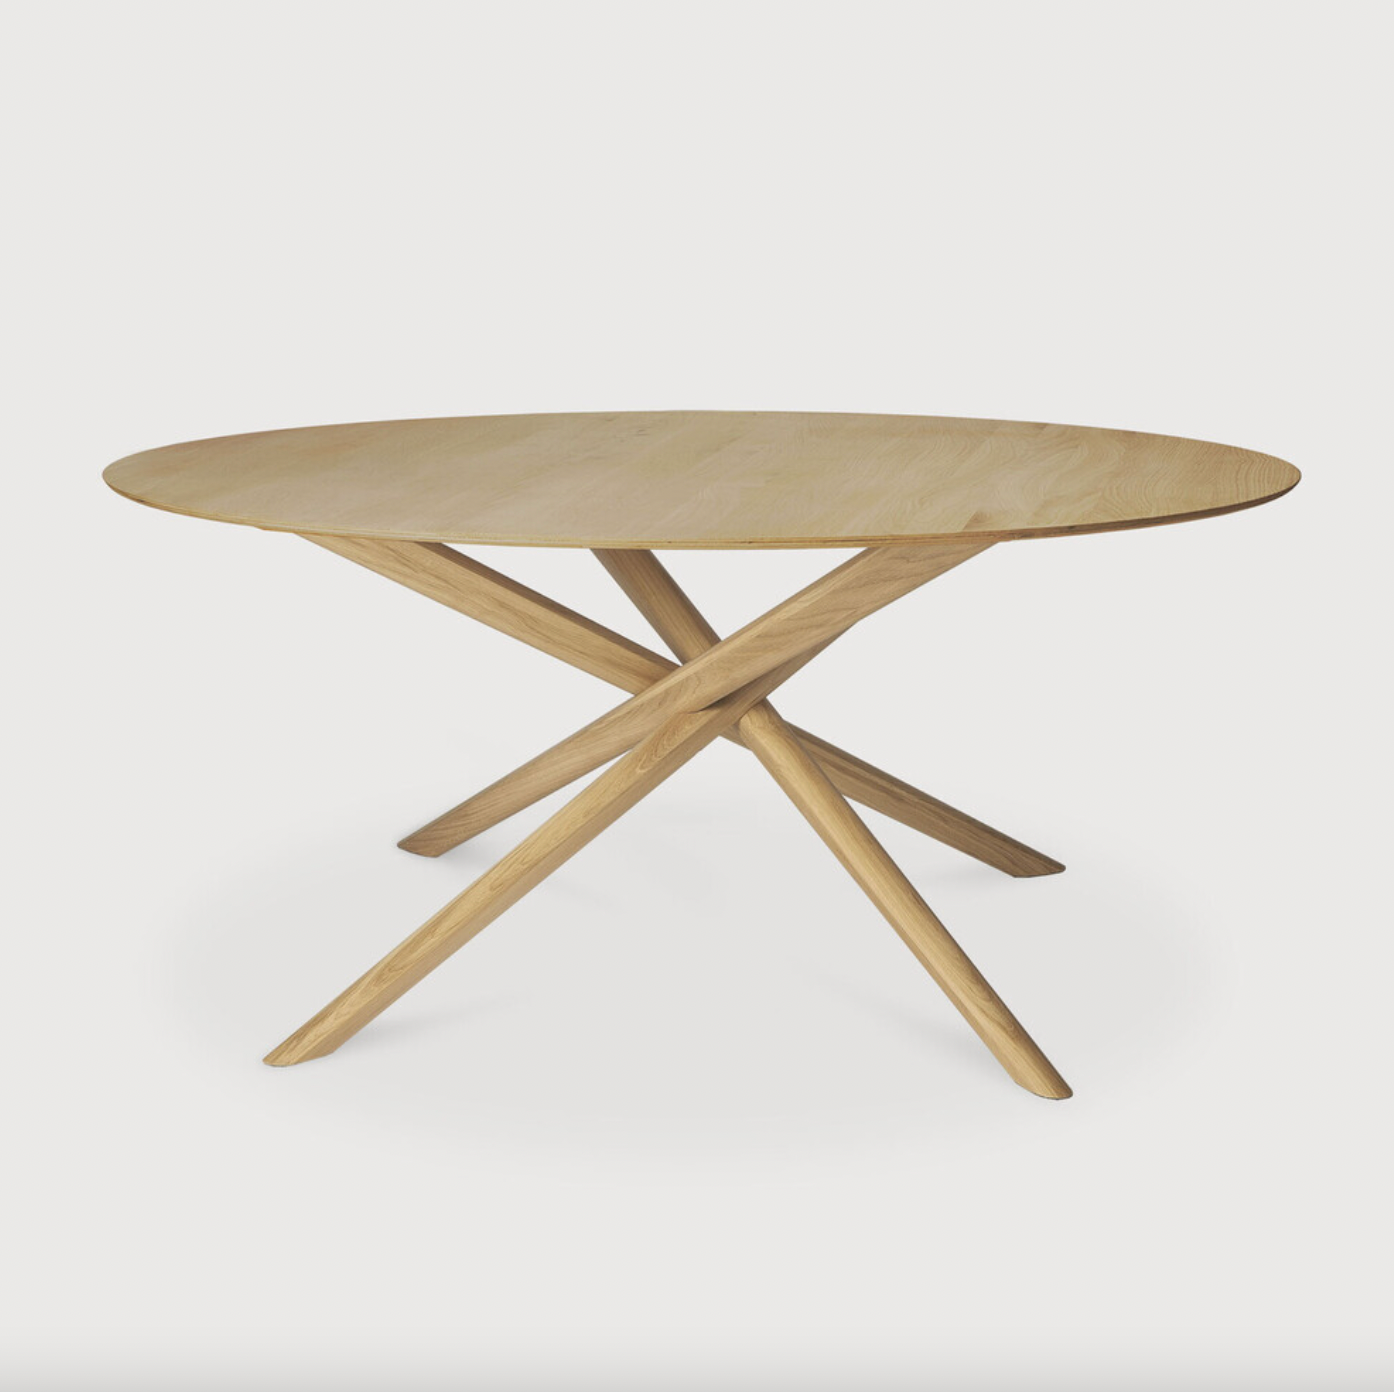 We love the sculptural character of this Oak Mikado Dining Table - Round. The legs interlock like a well-thought-out puzzle, making it easier to interact with your guests and allows you to converse with your family and friends for years to come!  Designed by Alain van Havre  Material: Oak, 100% Solid Wood Finish: Oiled